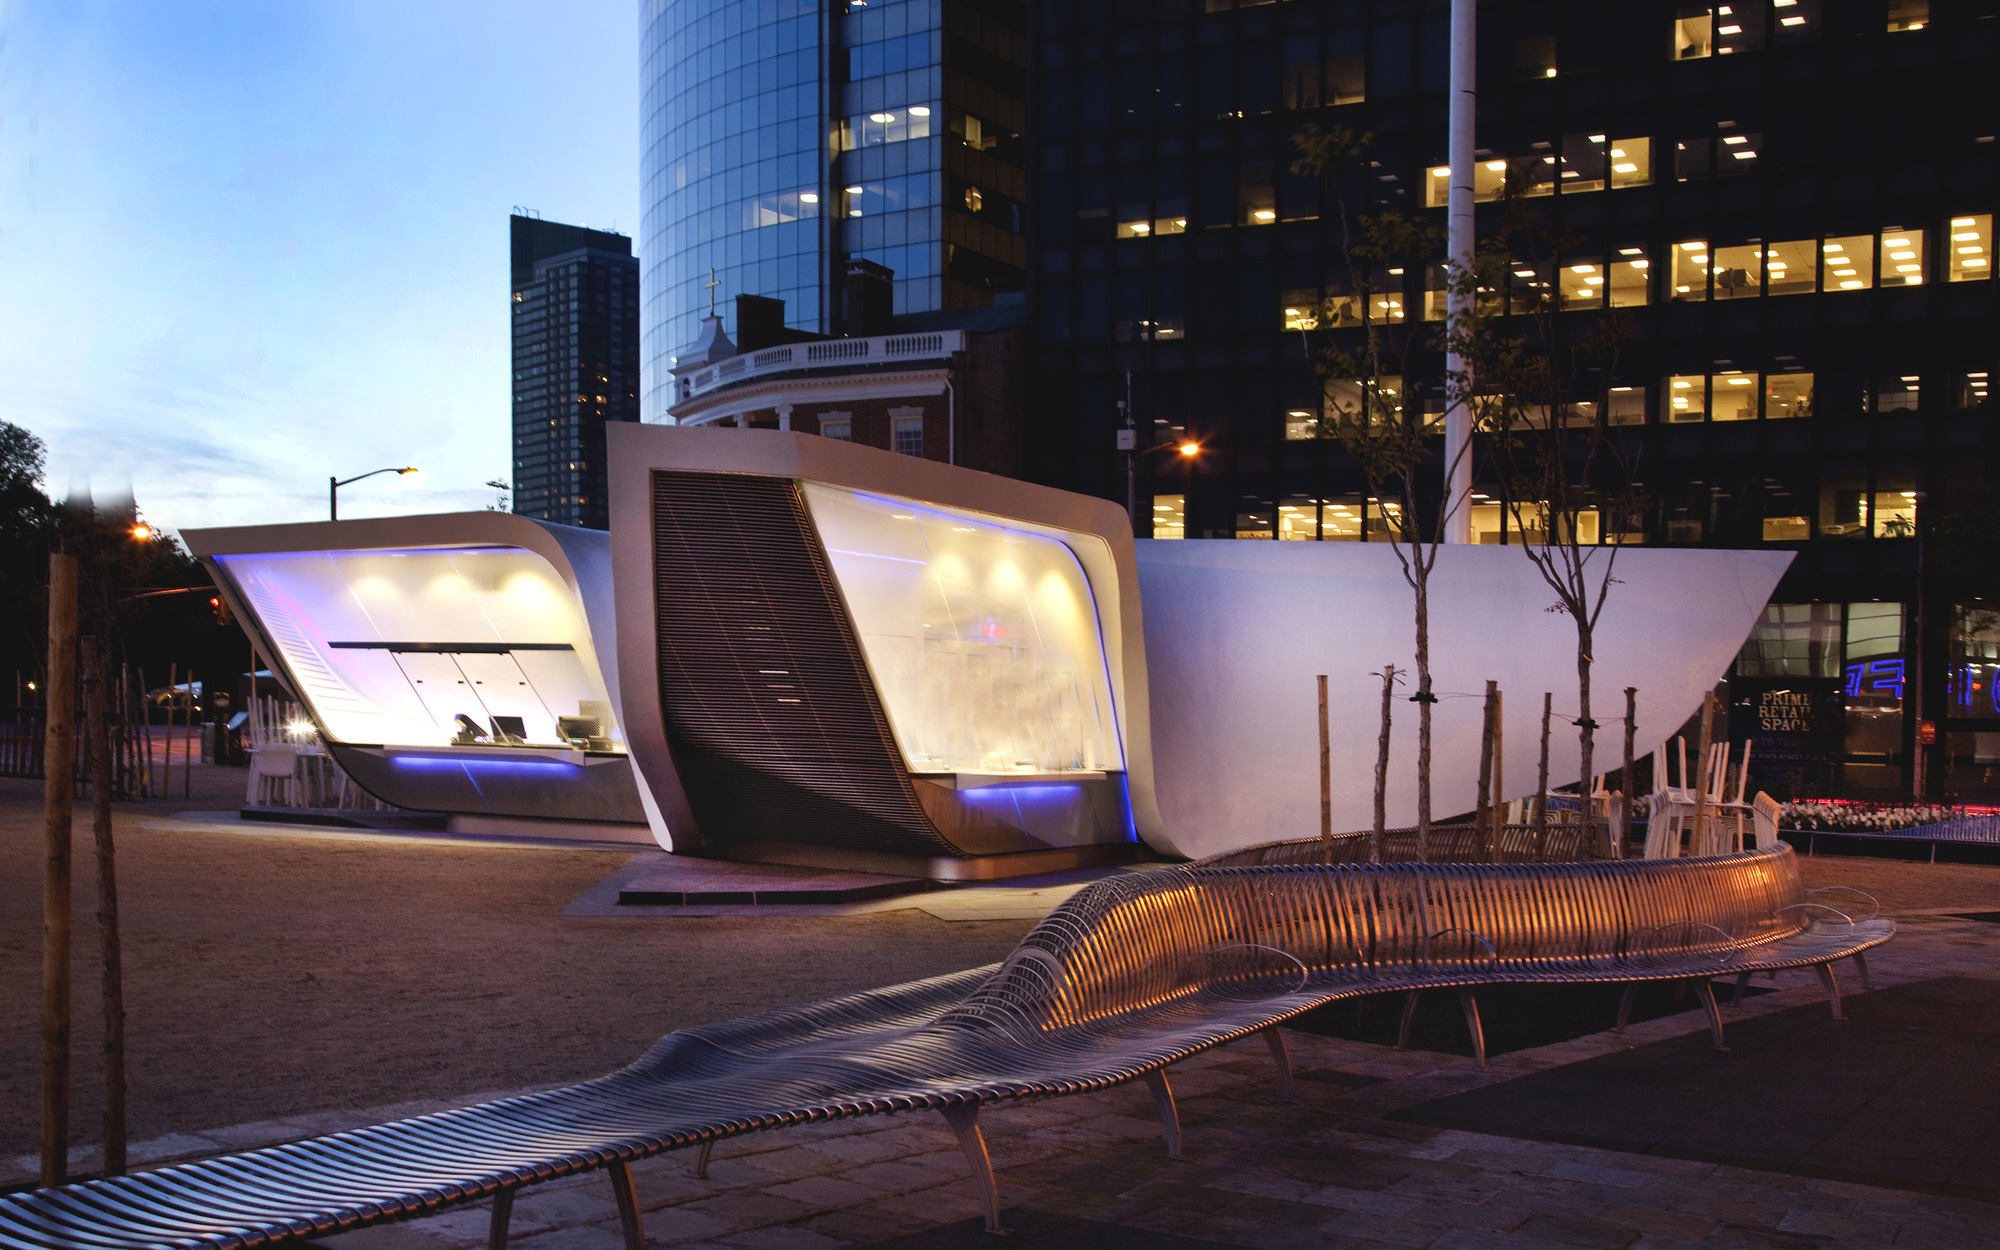 The New Amsterdam Plein & Pavilion in New York opens to the public